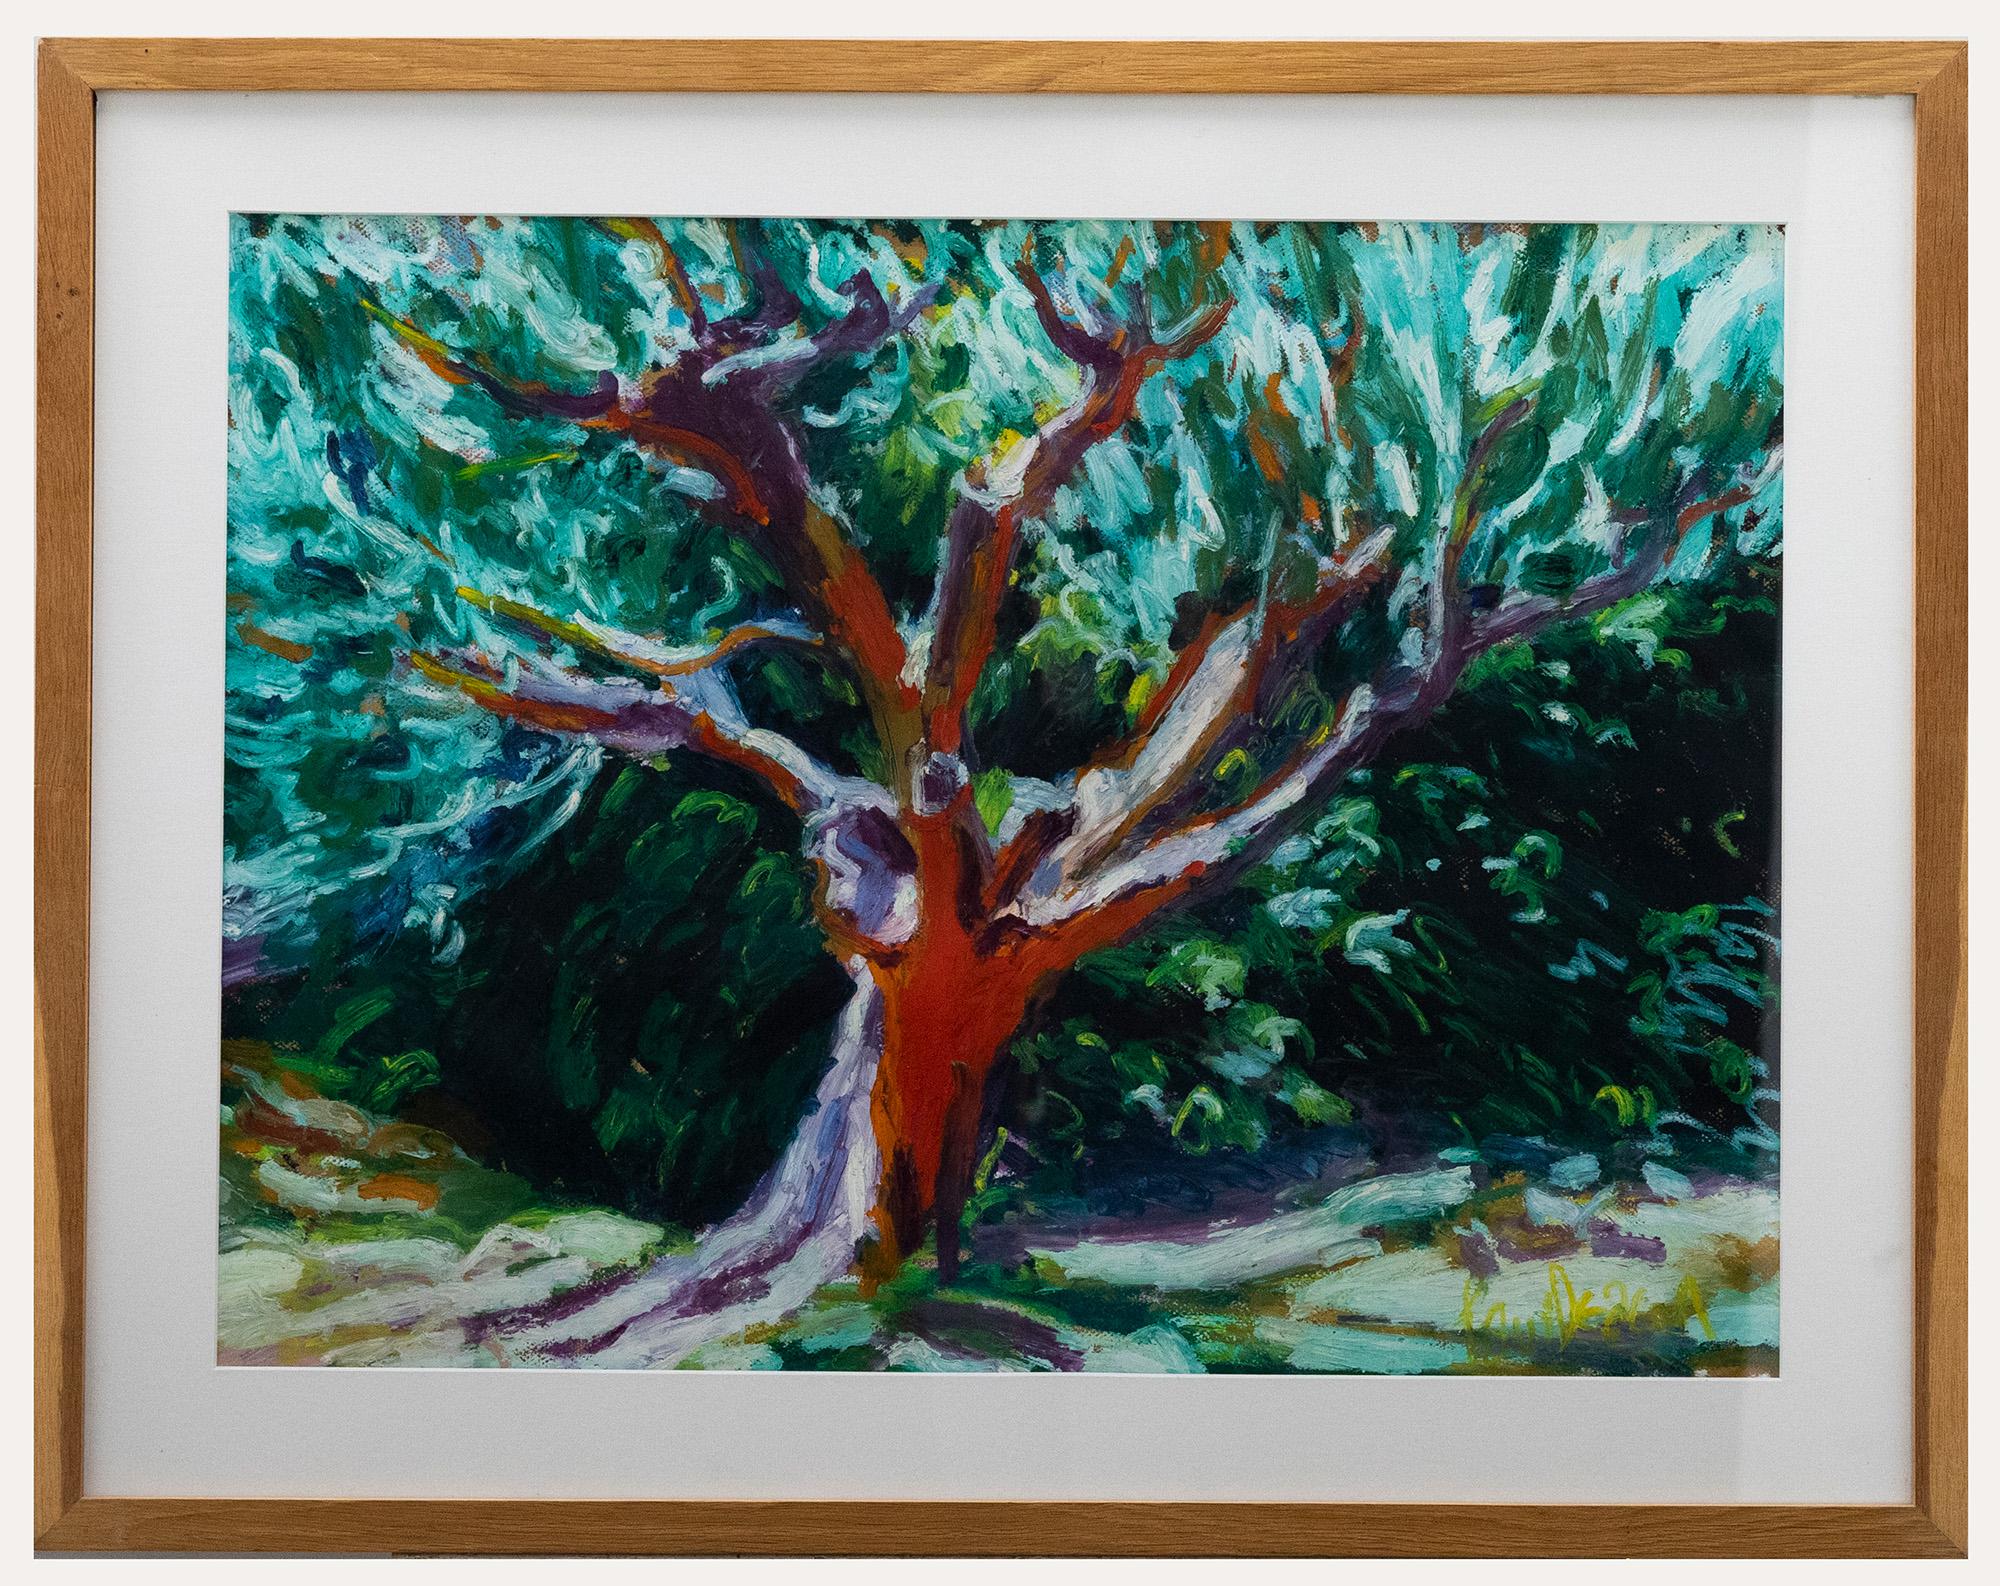 Unknown Landscape Art - Paul Deacon (b.1953) - Contemporary Oil Bar Pastel, A Grand Old Olive Tree